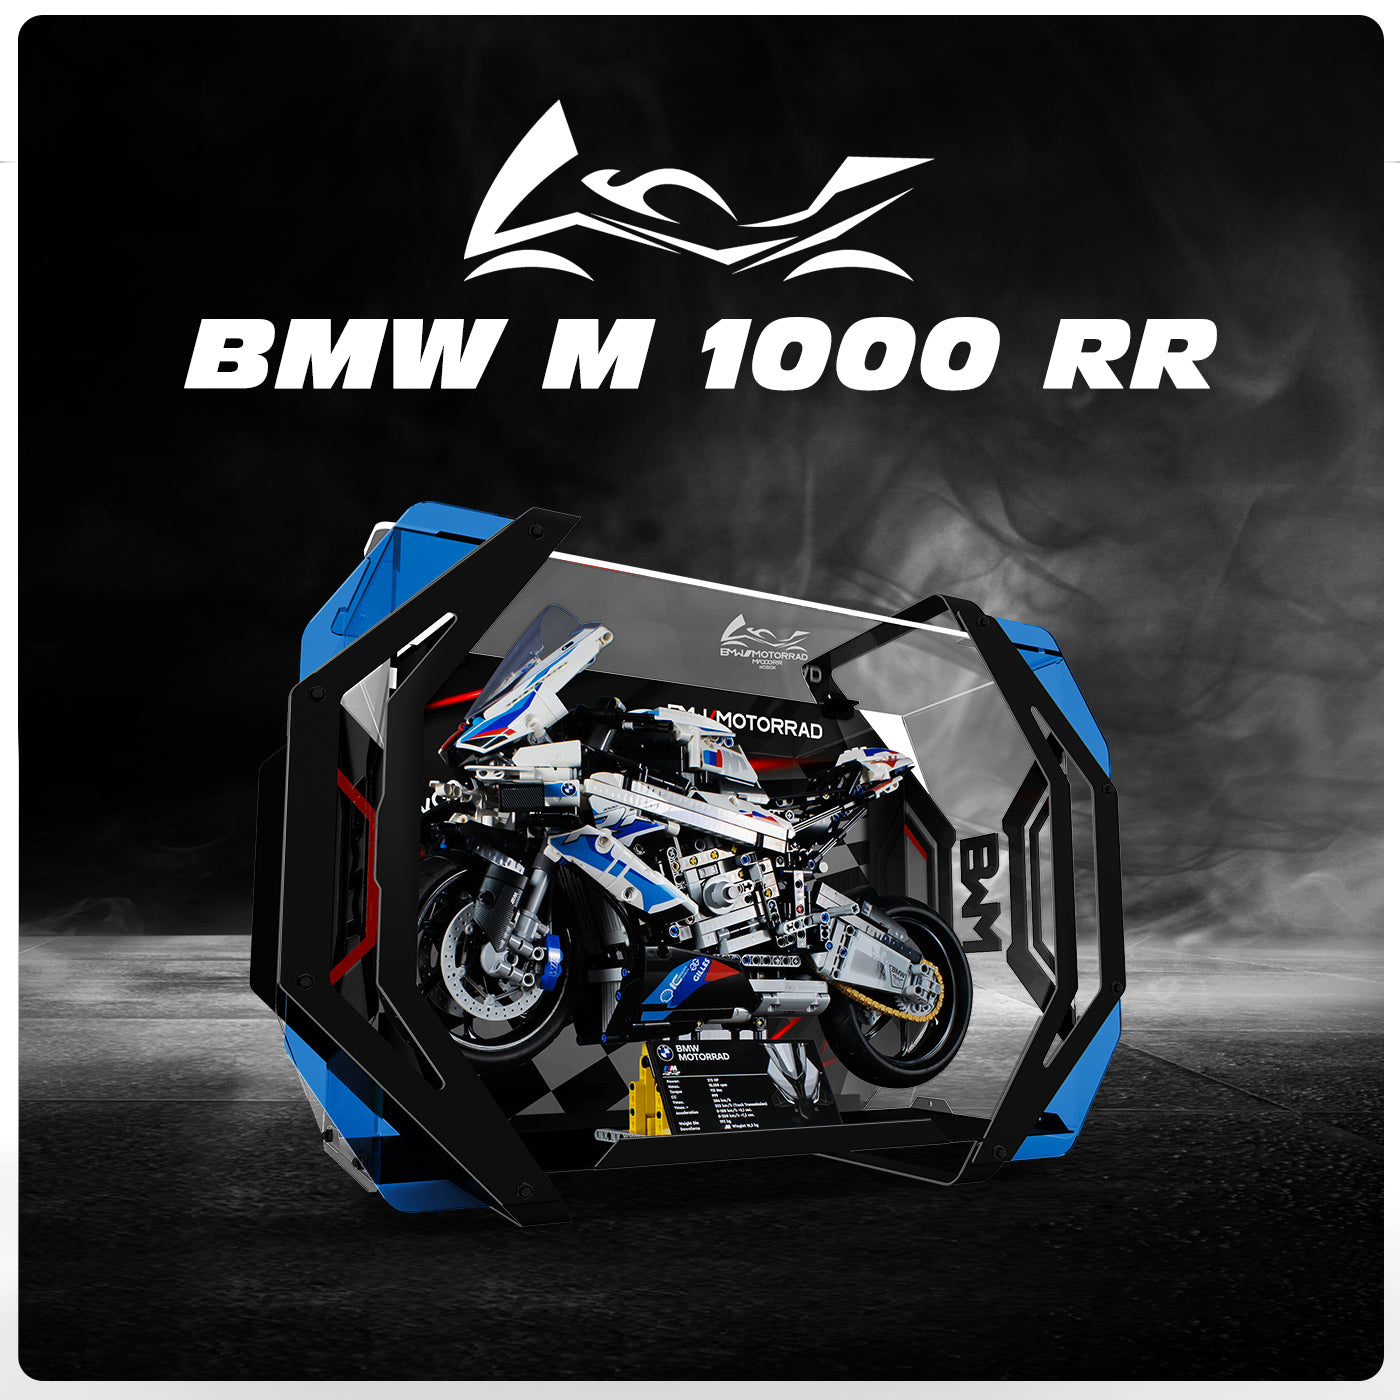 Lego 42130 BMW M 1000 RR Display Case Deluxe Edition